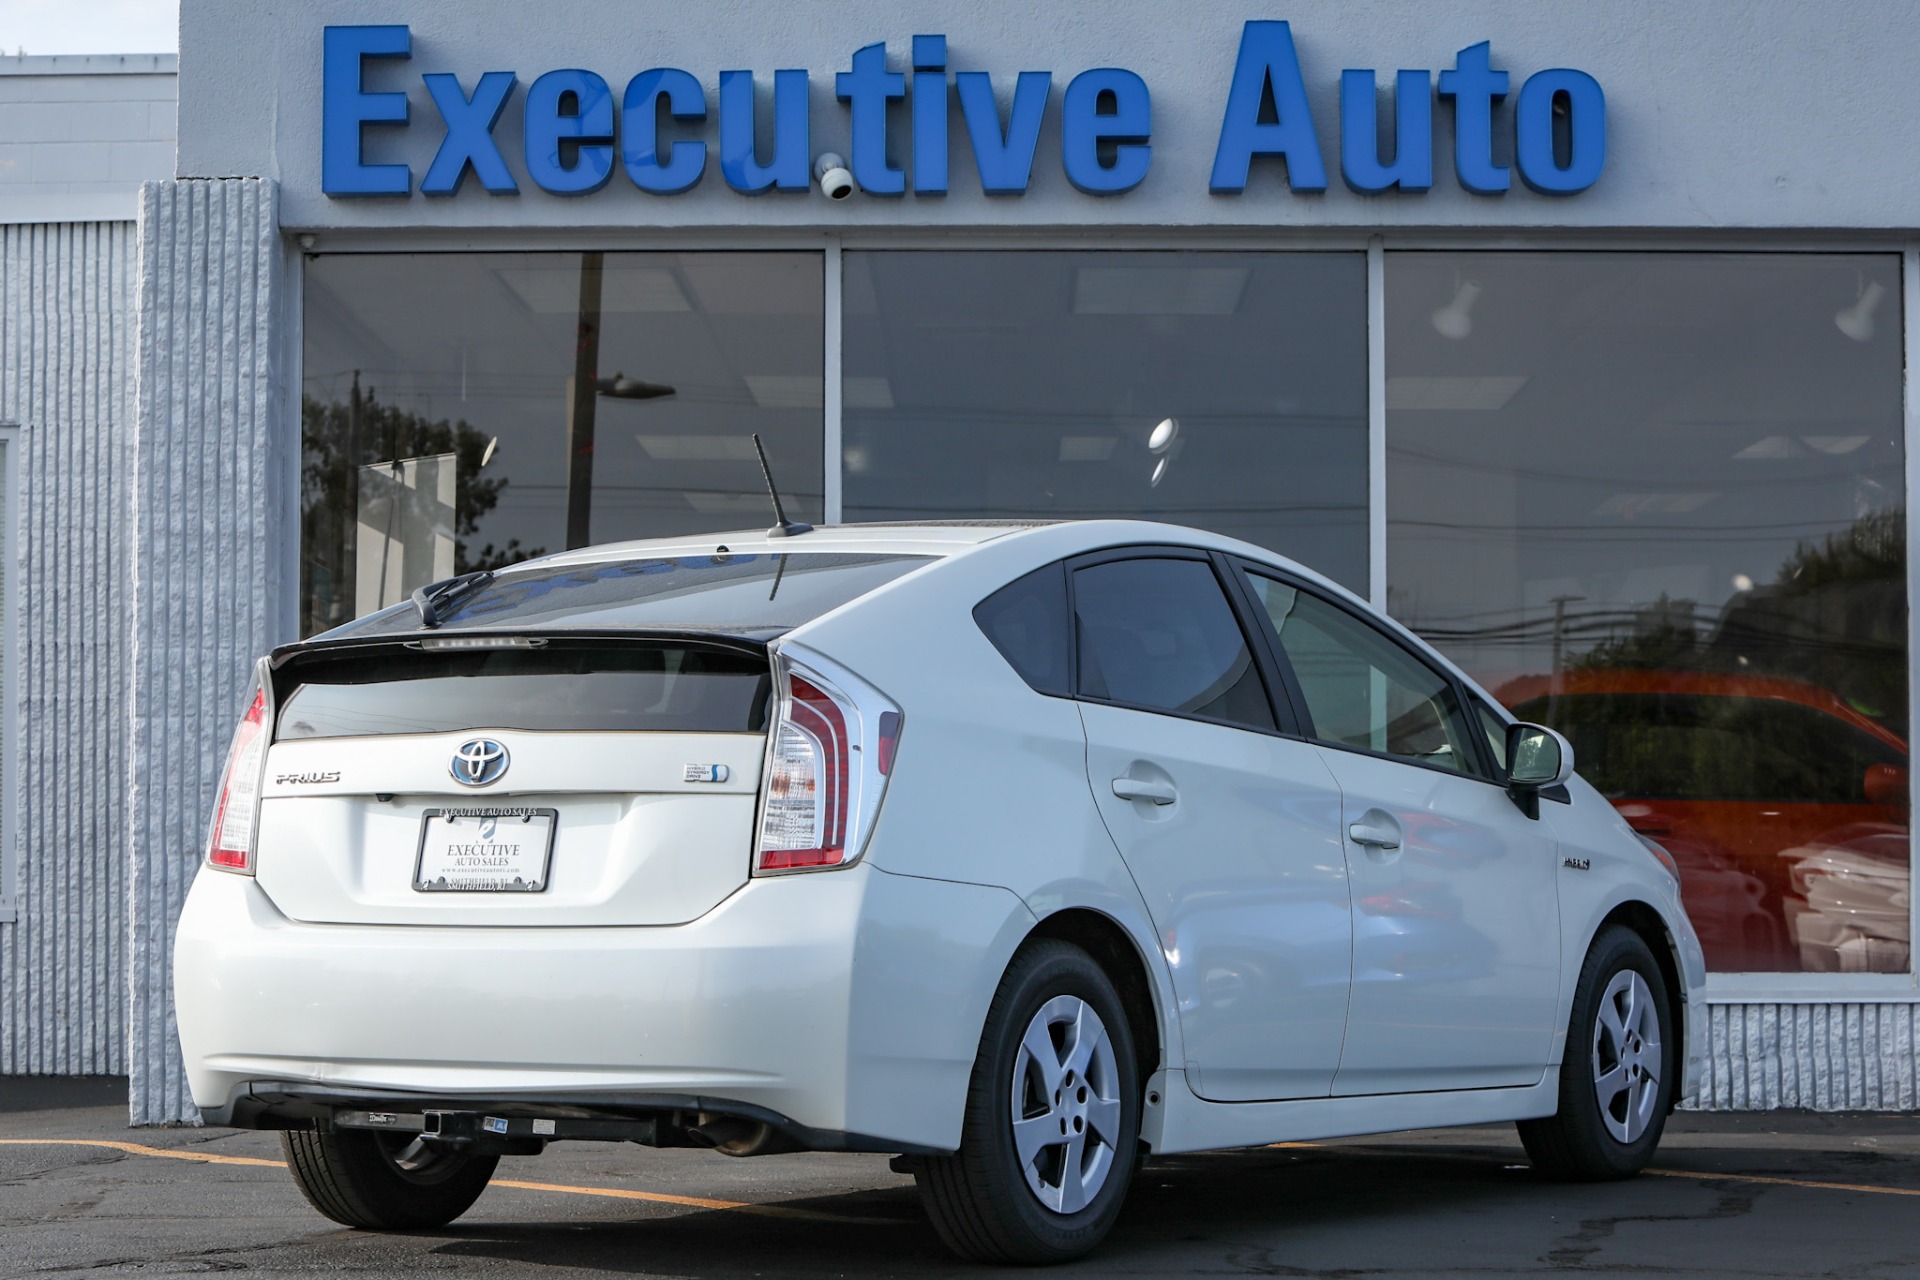 Used 2015 Toyota PRIUS IV For Sale 15 400 Executive Auto Sales 